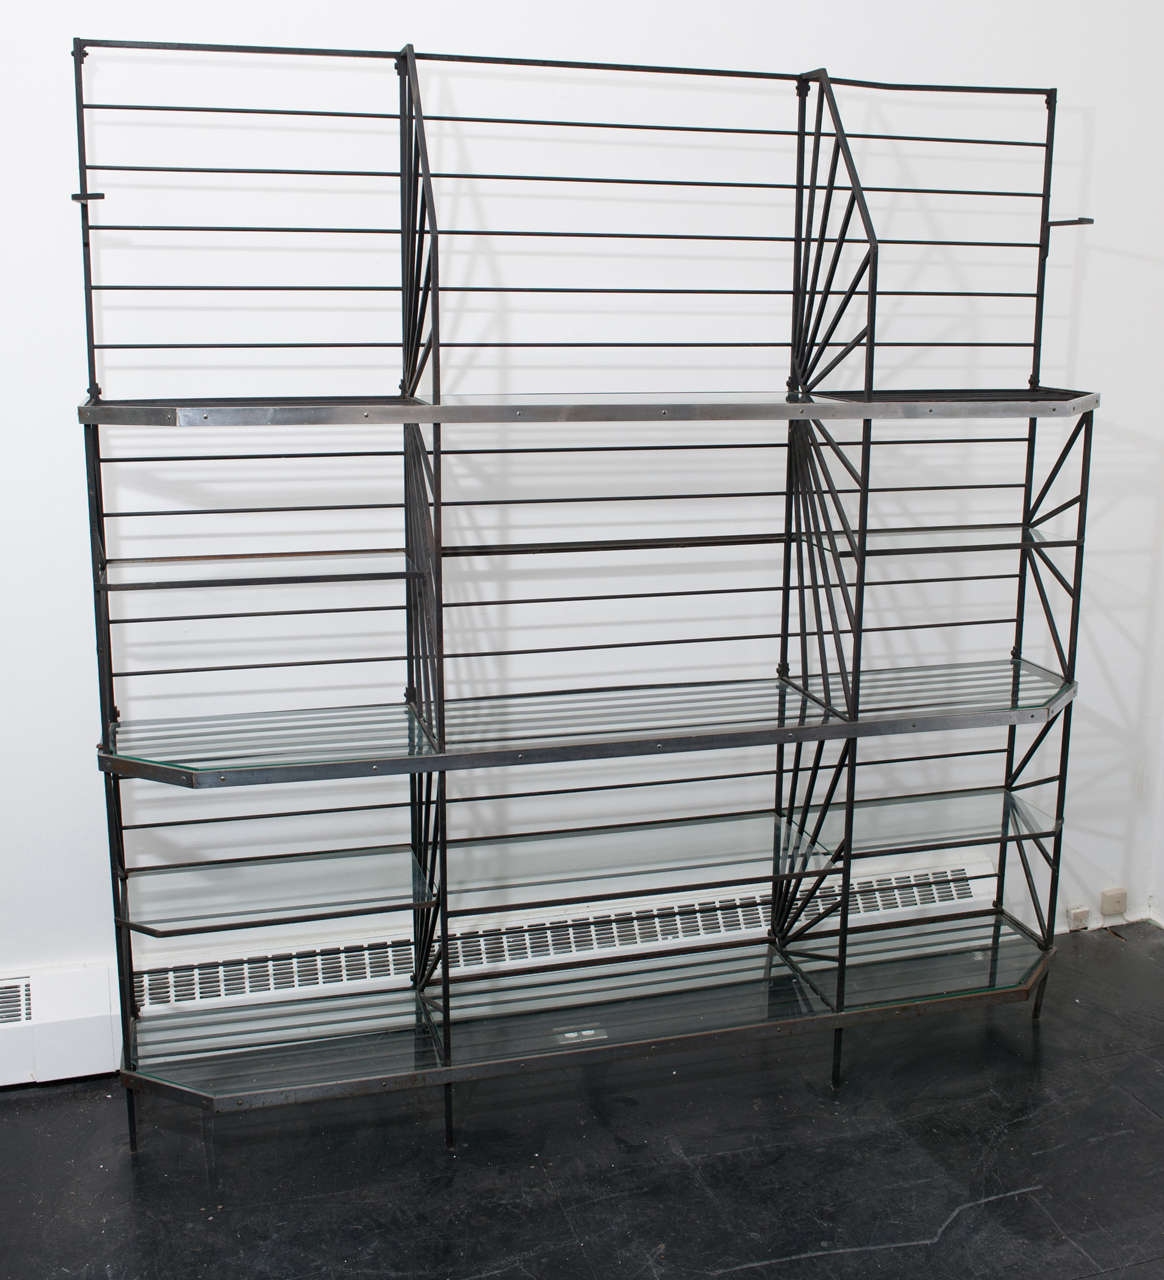 This is a stunning bakers/ display rack from the Art Deco period
with fitted glass shelves and chrome metal banding. A sculptural
and geometric beauty that combines form and function.